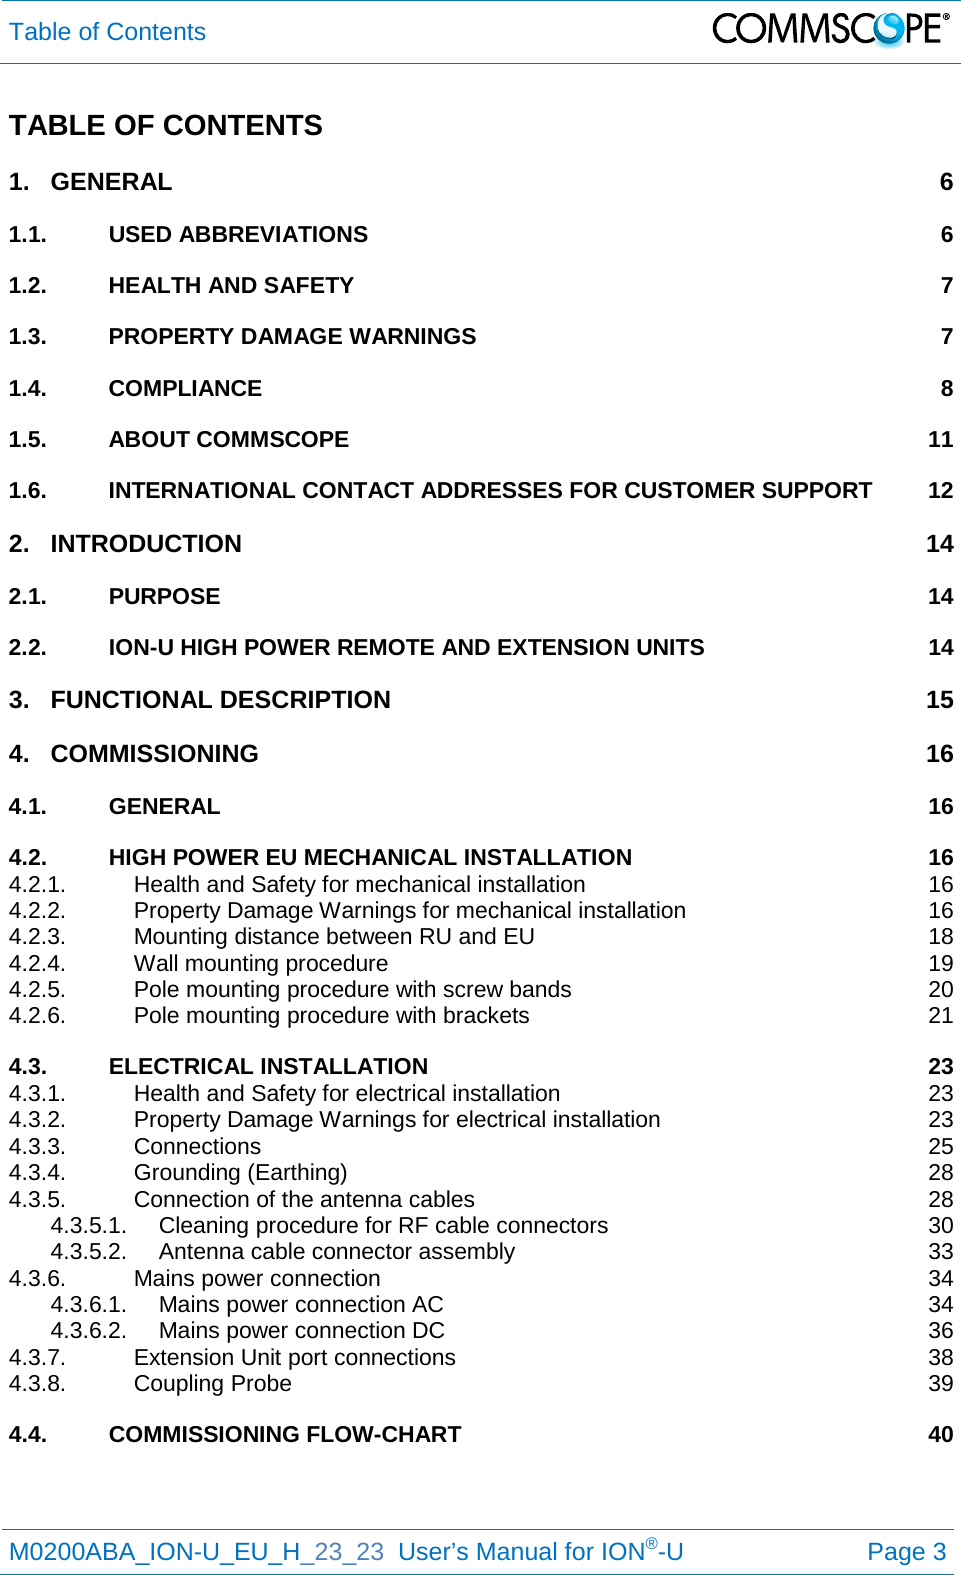 Table of Contents   M0200ABA_ION-U_EU_H_23_23  User’s Manual for ION®-U  Page 3  TABLE OF CONTENTS 1. GENERAL  6 1.1. USED ABBREVIATIONS  6 1.2. HEALTH AND SAFETY  7 1.3. PROPERTY DAMAGE WARNINGS  7 1.4. COMPLIANCE  8 1.5. ABOUT COMMSCOPE 11 1.6. INTERNATIONAL CONTACT ADDRESSES FOR CUSTOMER SUPPORT 12 2. INTRODUCTION 14 2.1. PURPOSE 14 2.2. ION-U HIGH POWER REMOTE AND EXTENSION UNITS 14 3. FUNCTIONAL DESCRIPTION 15 4. COMMISSIONING 16 4.1. GENERAL 16 4.2. HIGH POWER EU MECHANICAL INSTALLATION 16 4.2.1. Health and Safety for mechanical installation 16 4.2.2. Property Damage Warnings for mechanical installation 16 4.2.3. Mounting distance between RU and EU 18 4.2.4. Wall mounting procedure 19 4.2.5. Pole mounting procedure with screw bands 20 4.2.6. Pole mounting procedure with brackets 21 4.3. ELECTRICAL INSTALLATION 23 4.3.1. Health and Safety for electrical installation 23 4.3.2. Property Damage Warnings for electrical installation 23 4.3.3. Connections 25 4.3.4. Grounding (Earthing) 28 4.3.5. Connection of the antenna cables 28 4.3.5.1. Cleaning procedure for RF cable connectors 30 4.3.5.2. Antenna cable connector assembly 33 4.3.6. Mains power connection 34 4.3.6.1. Mains power connection AC 34 4.3.6.2. Mains power connection DC 36 4.3.7. Extension Unit port connections 38 4.3.8. Coupling Probe 39 4.4. COMMISSIONING FLOW-CHART 40   